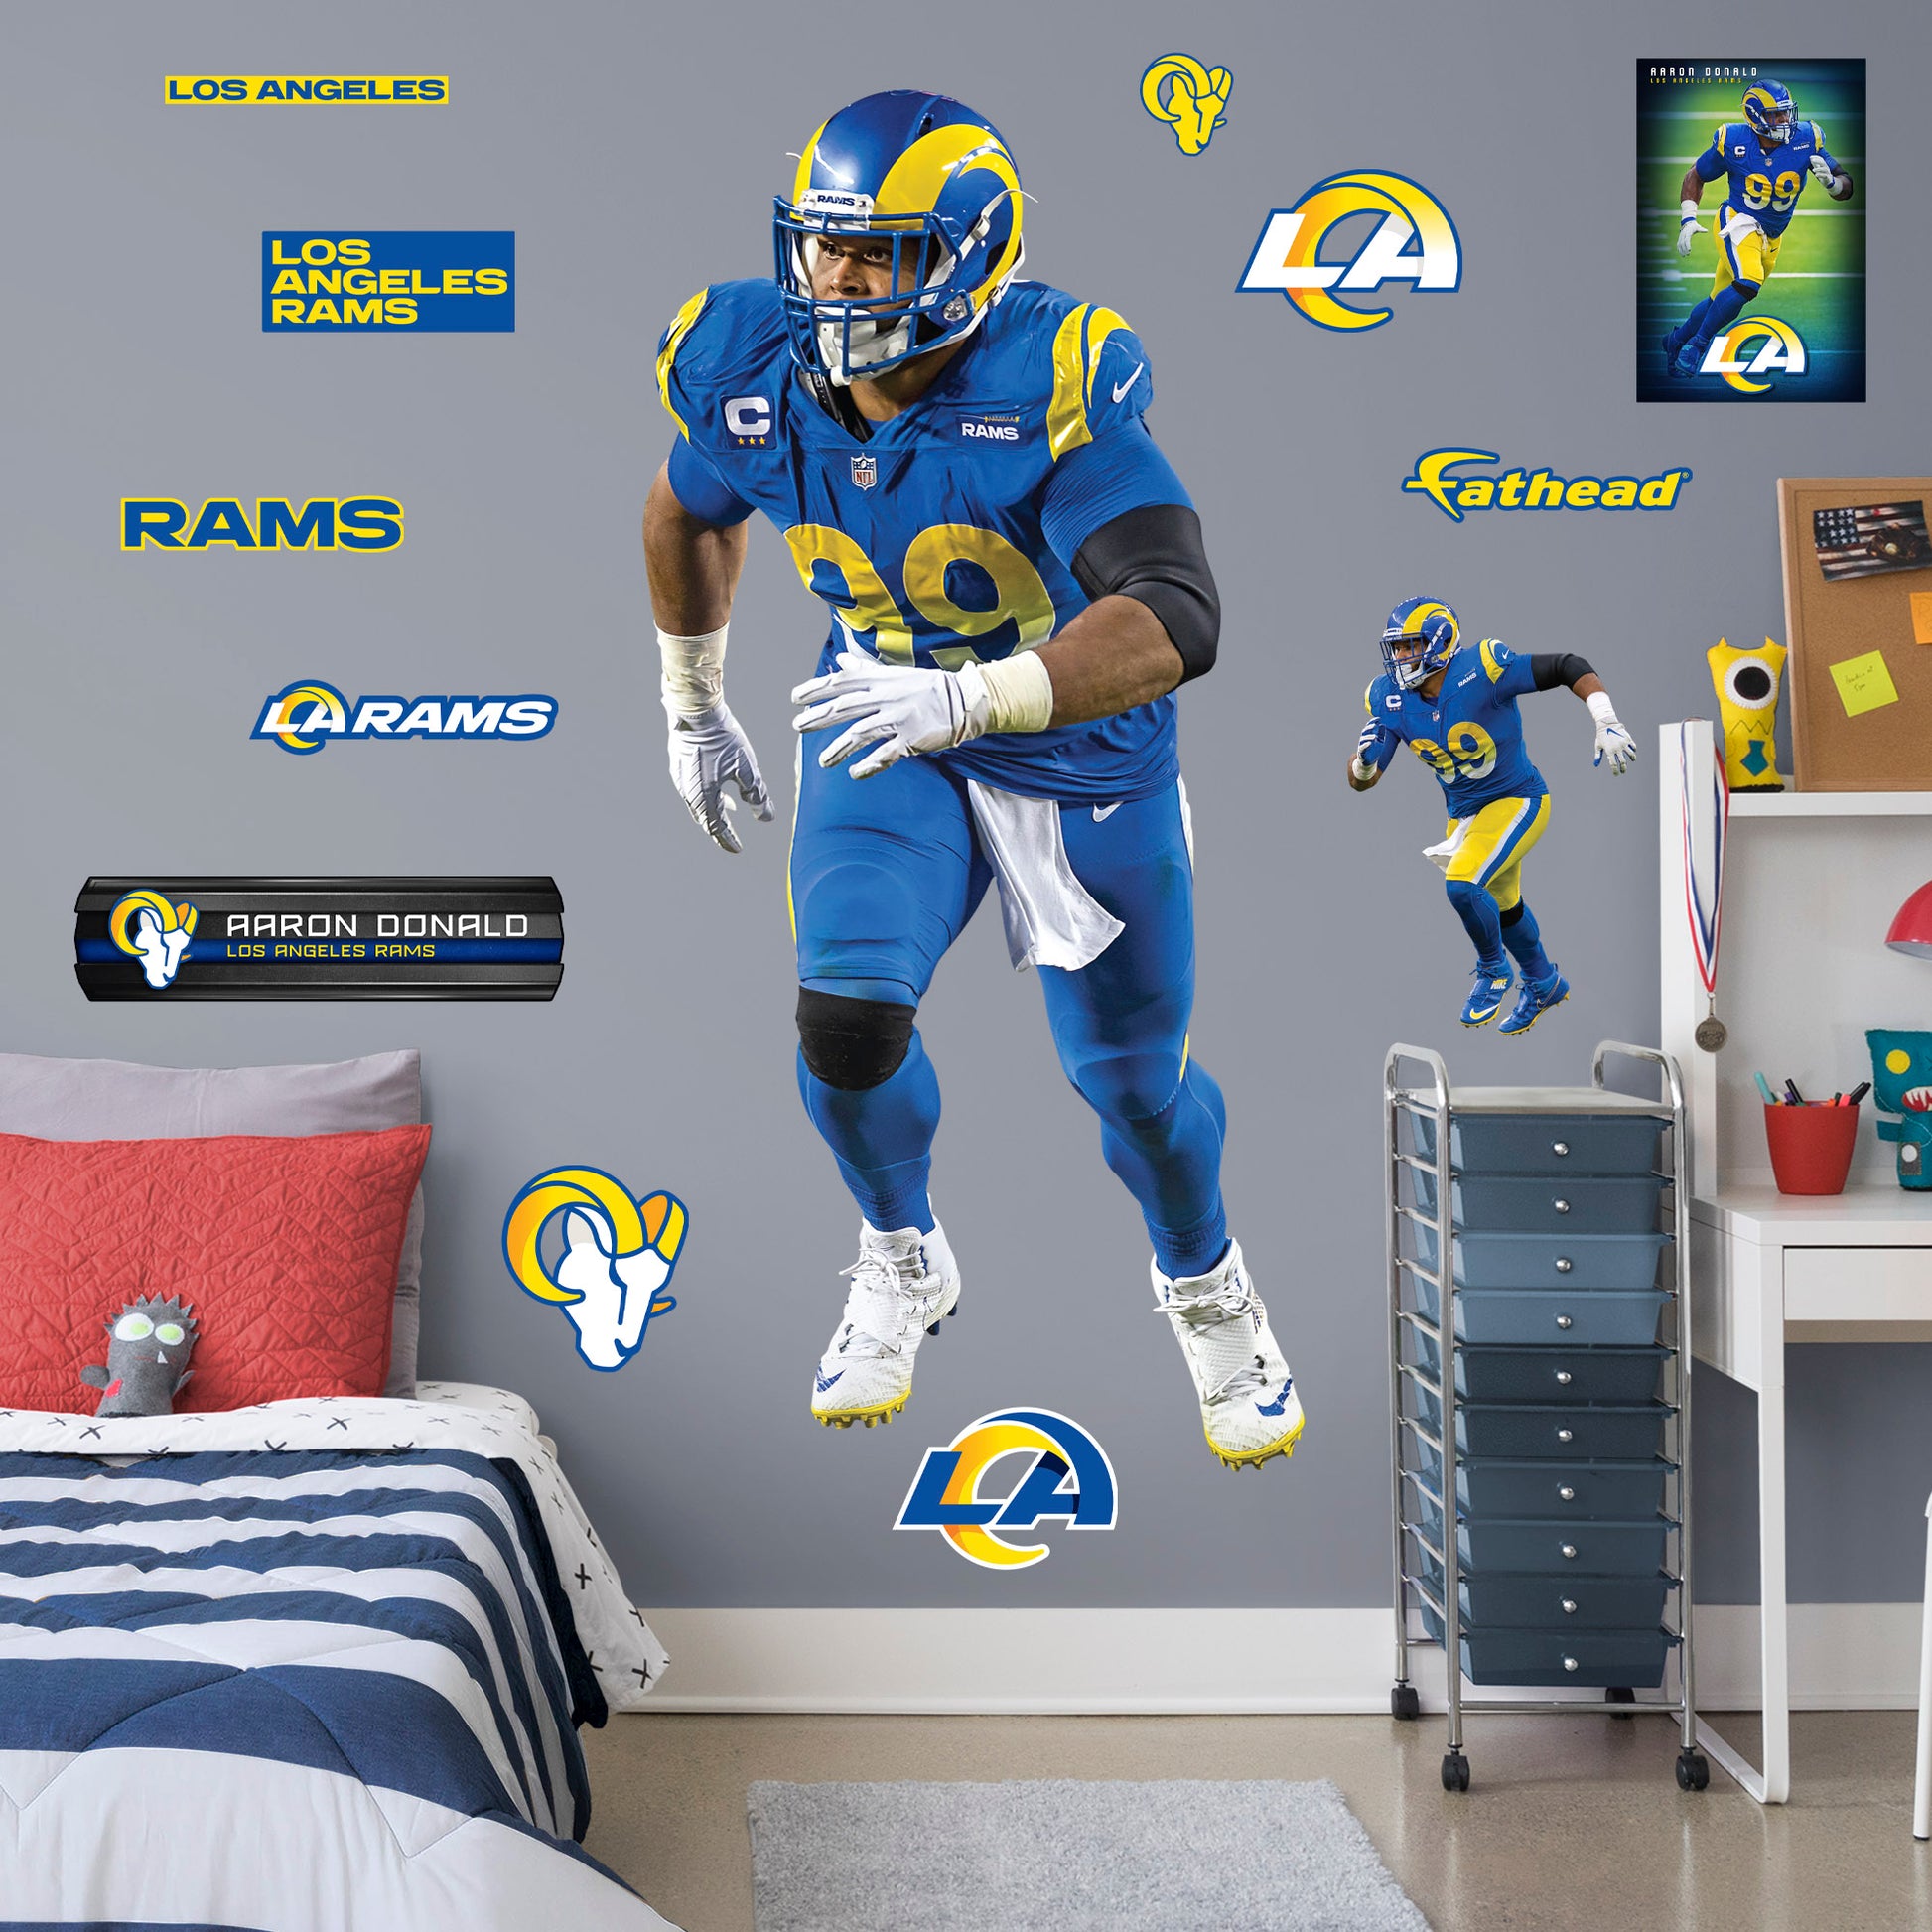 Aaron Donald 2020 Blue Jersey - NFL Removable Wall Decal Life-Size Athlete + 12 Wall Decals 37W x 77H